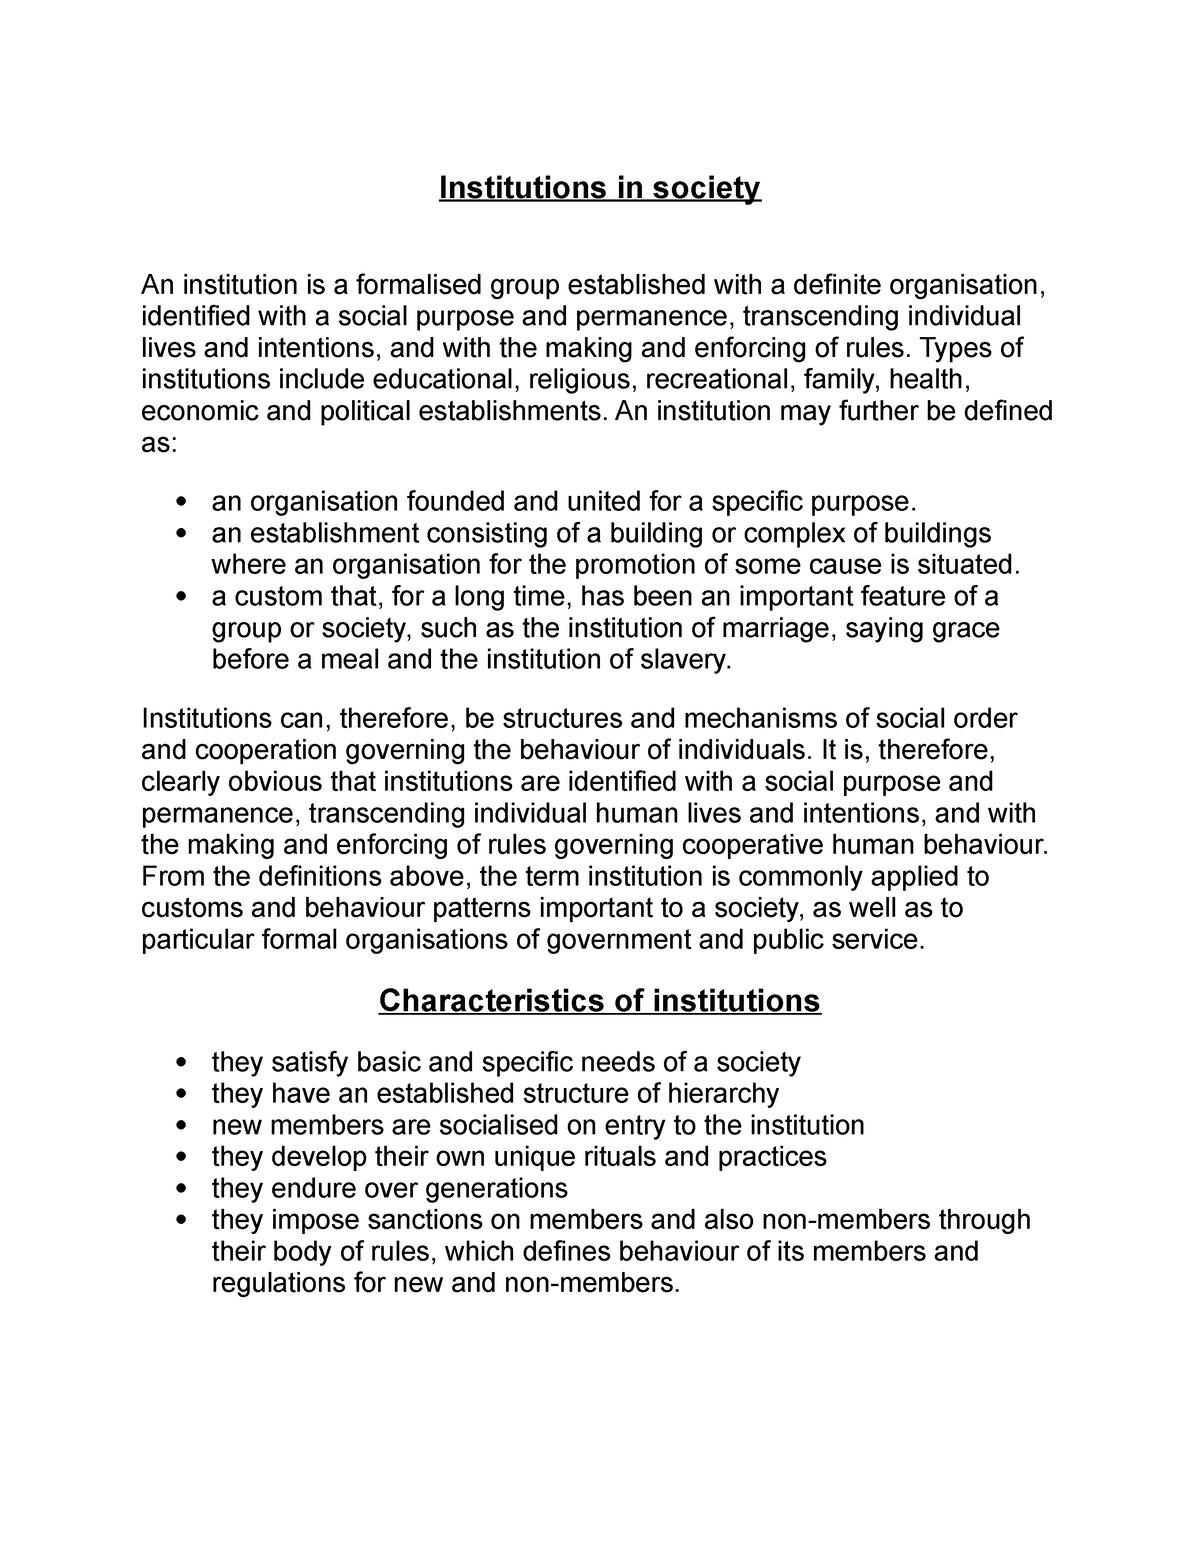 Institutions in society - Types of institutions include educational ...